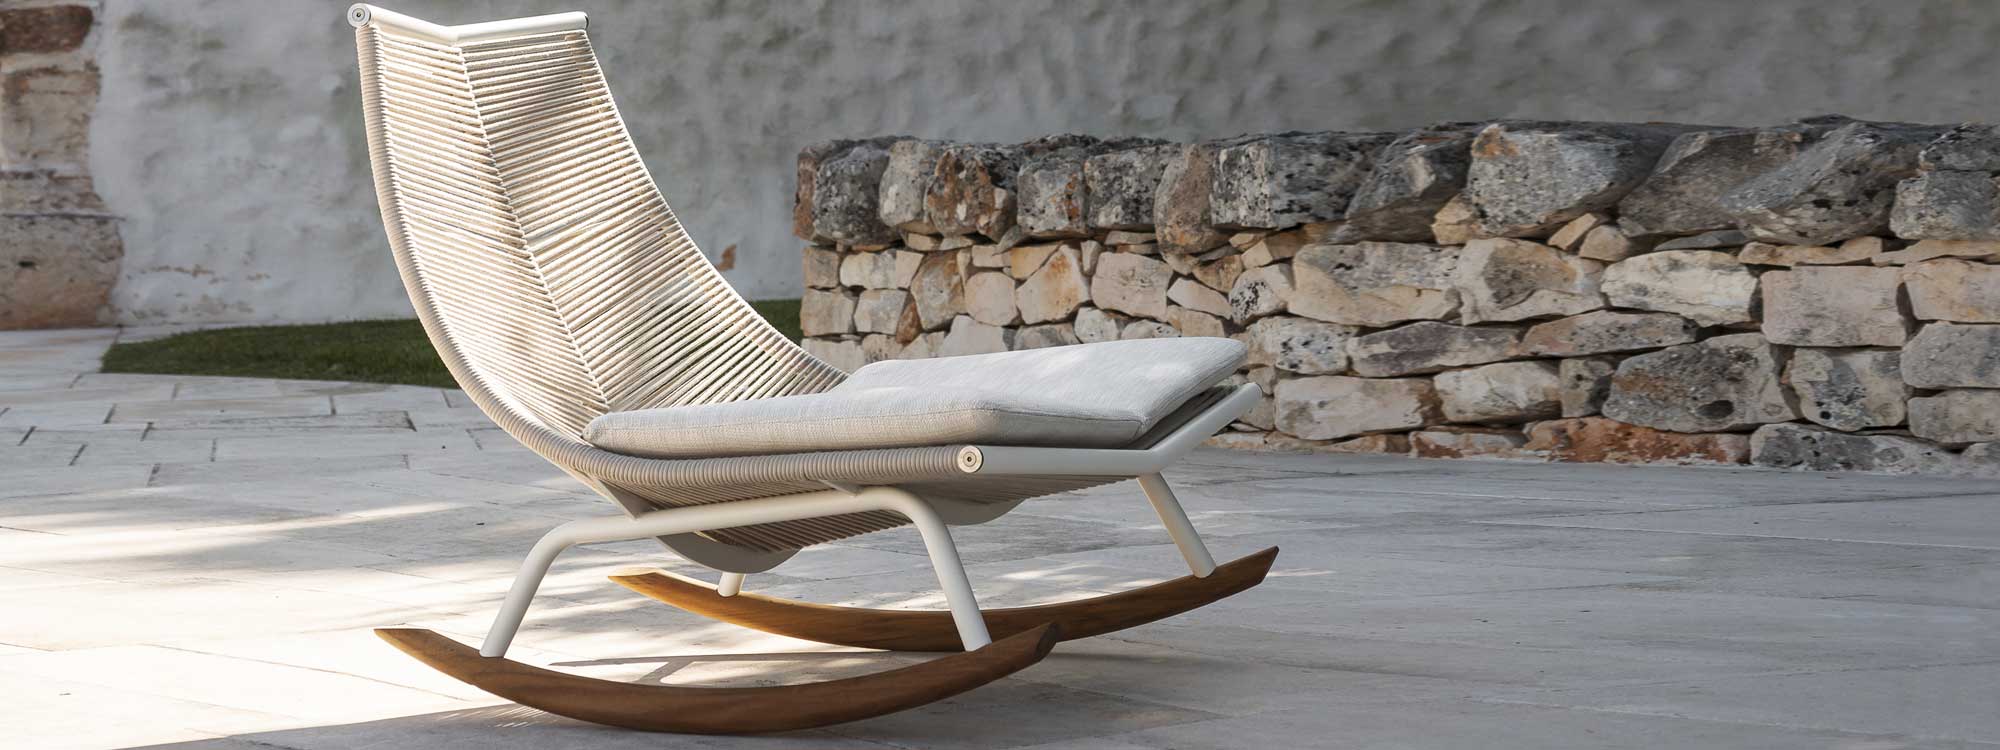 Image of RODA Laze outdoor rocking chair with Milk-Coloured frame and Sand cords, on terrace against drystone wall